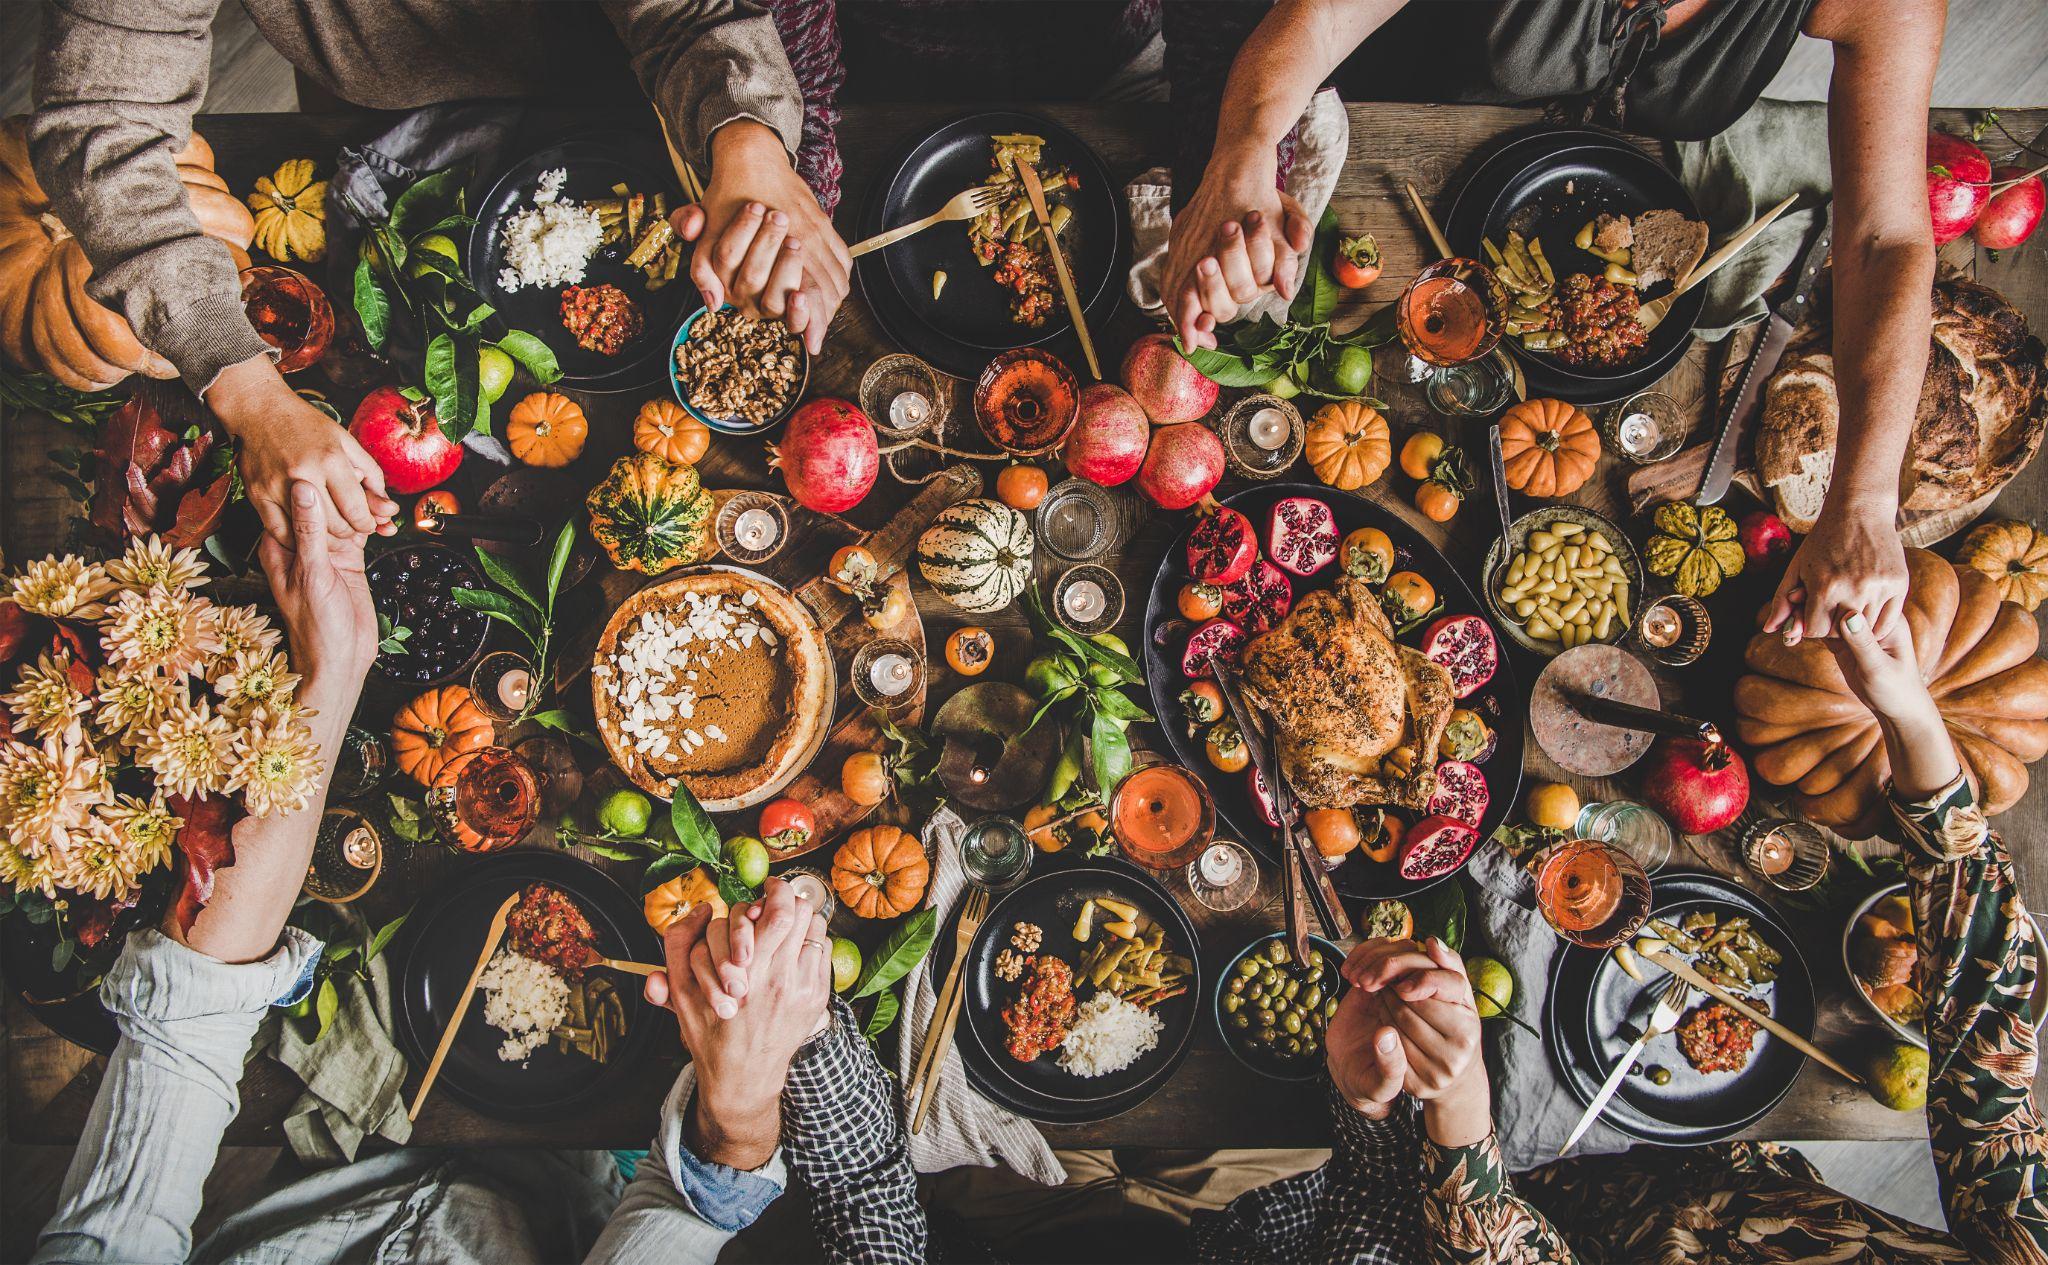 Family praying holding hands at Thanksgiving table.